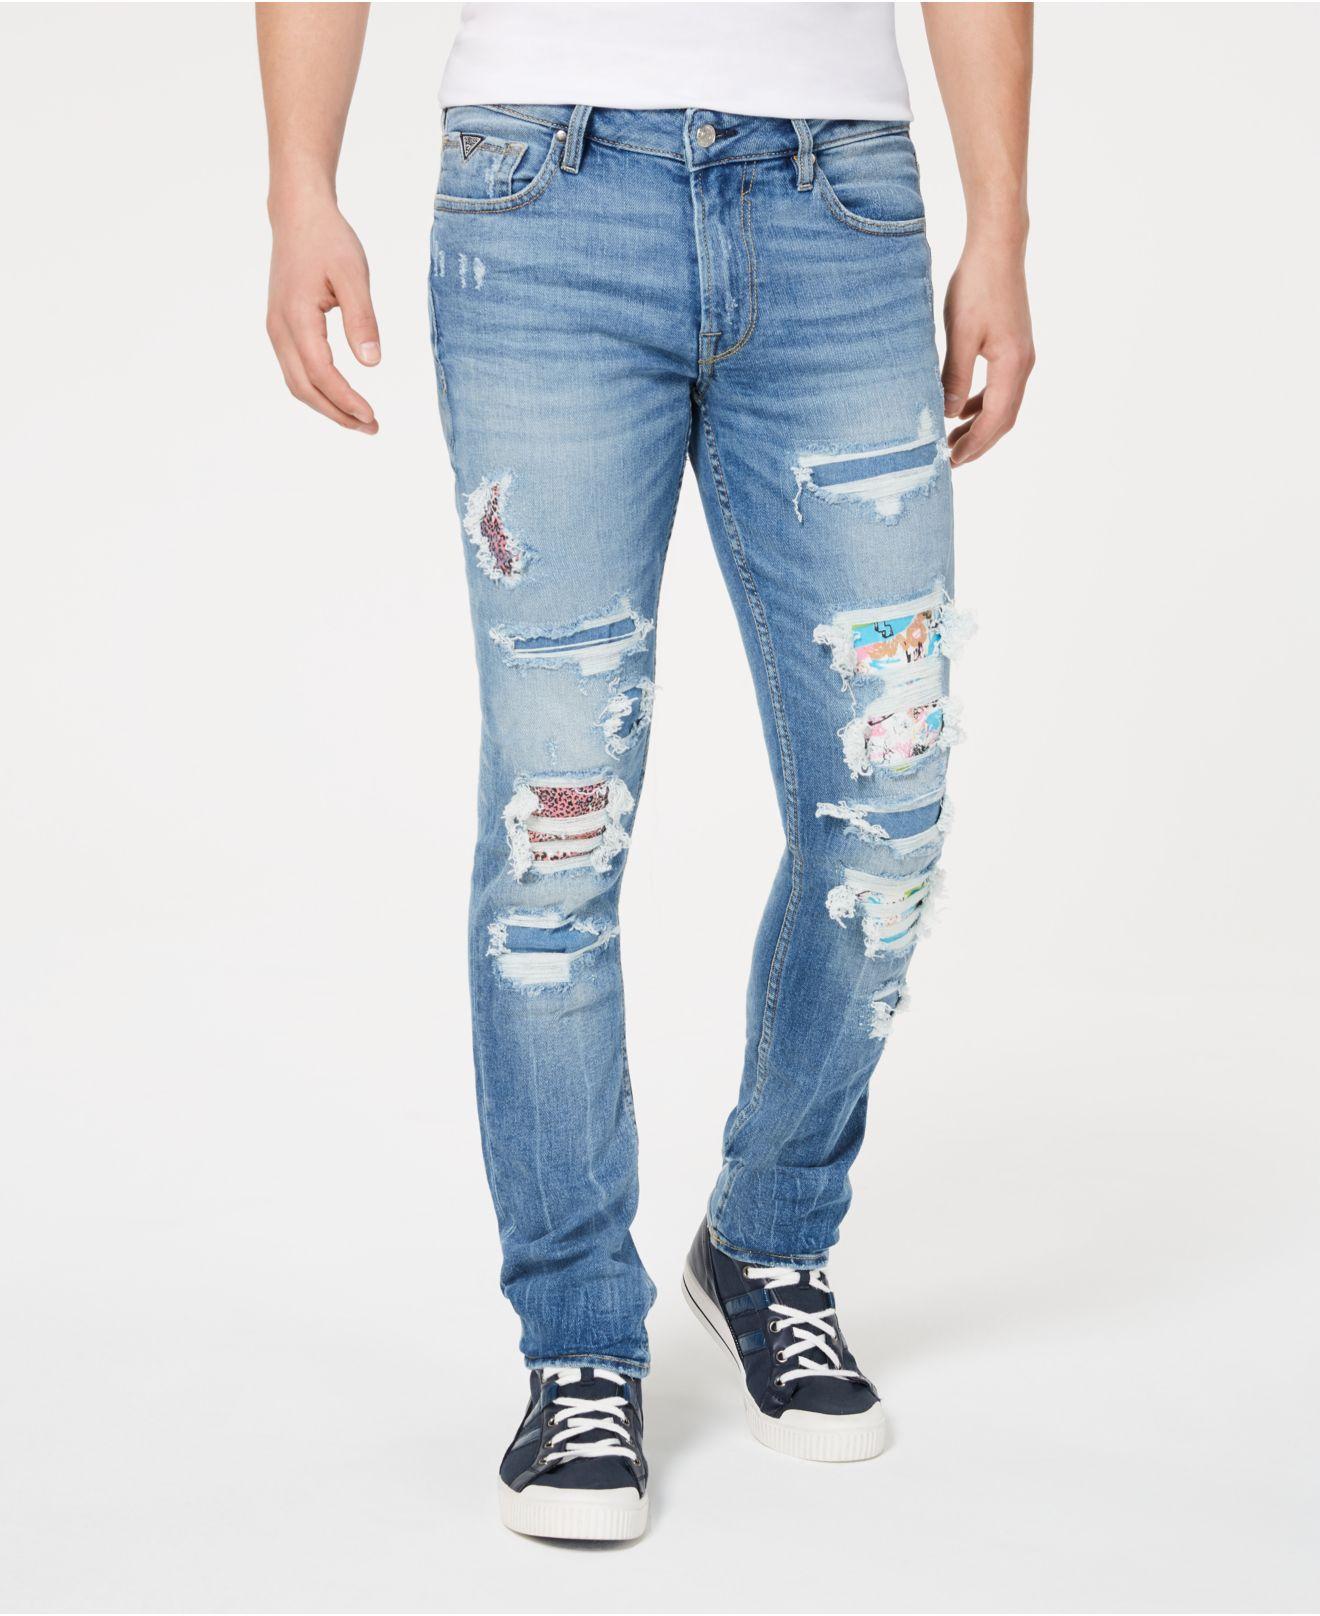 Guess Skinny-fit Stretch Patched Destroyed Jeans in Blue for Men - Lyst